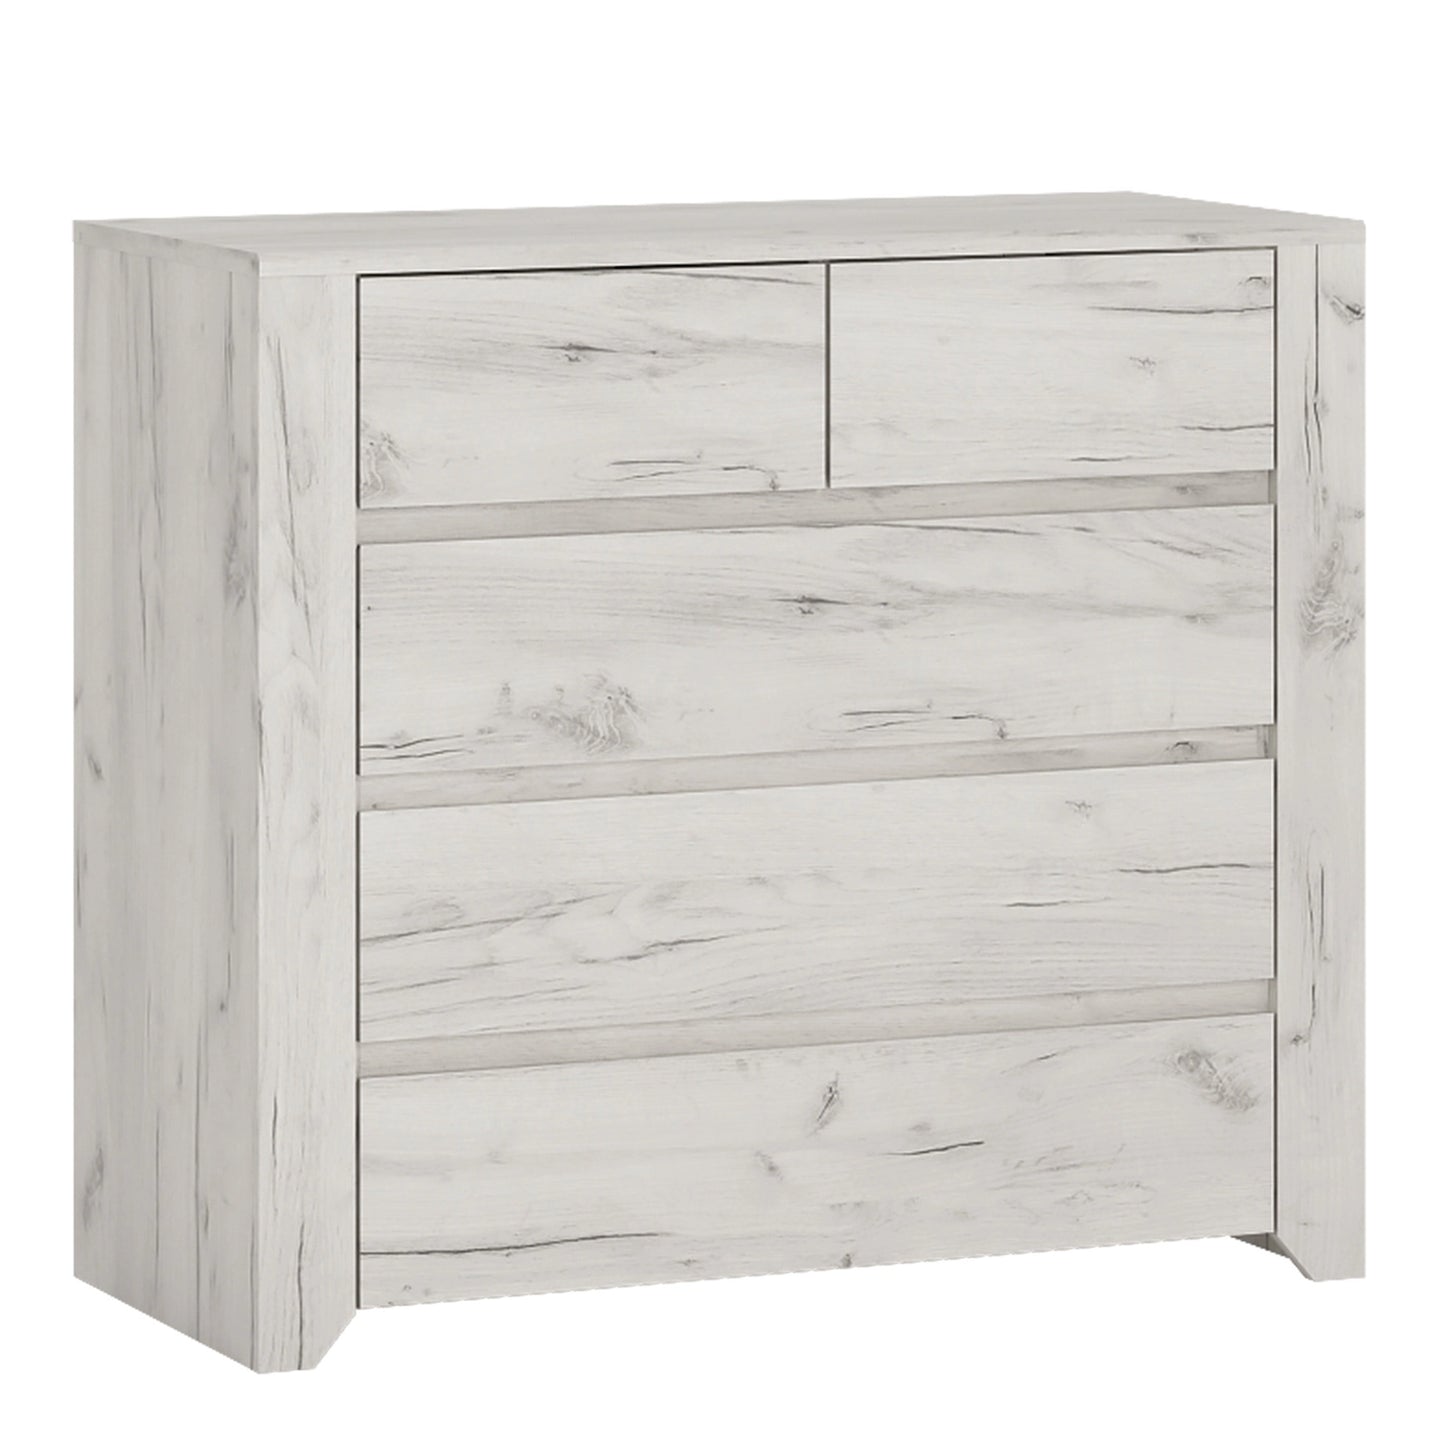 Furniture To Go Angel 2+3 Chest of Drawers in White Craft Oak